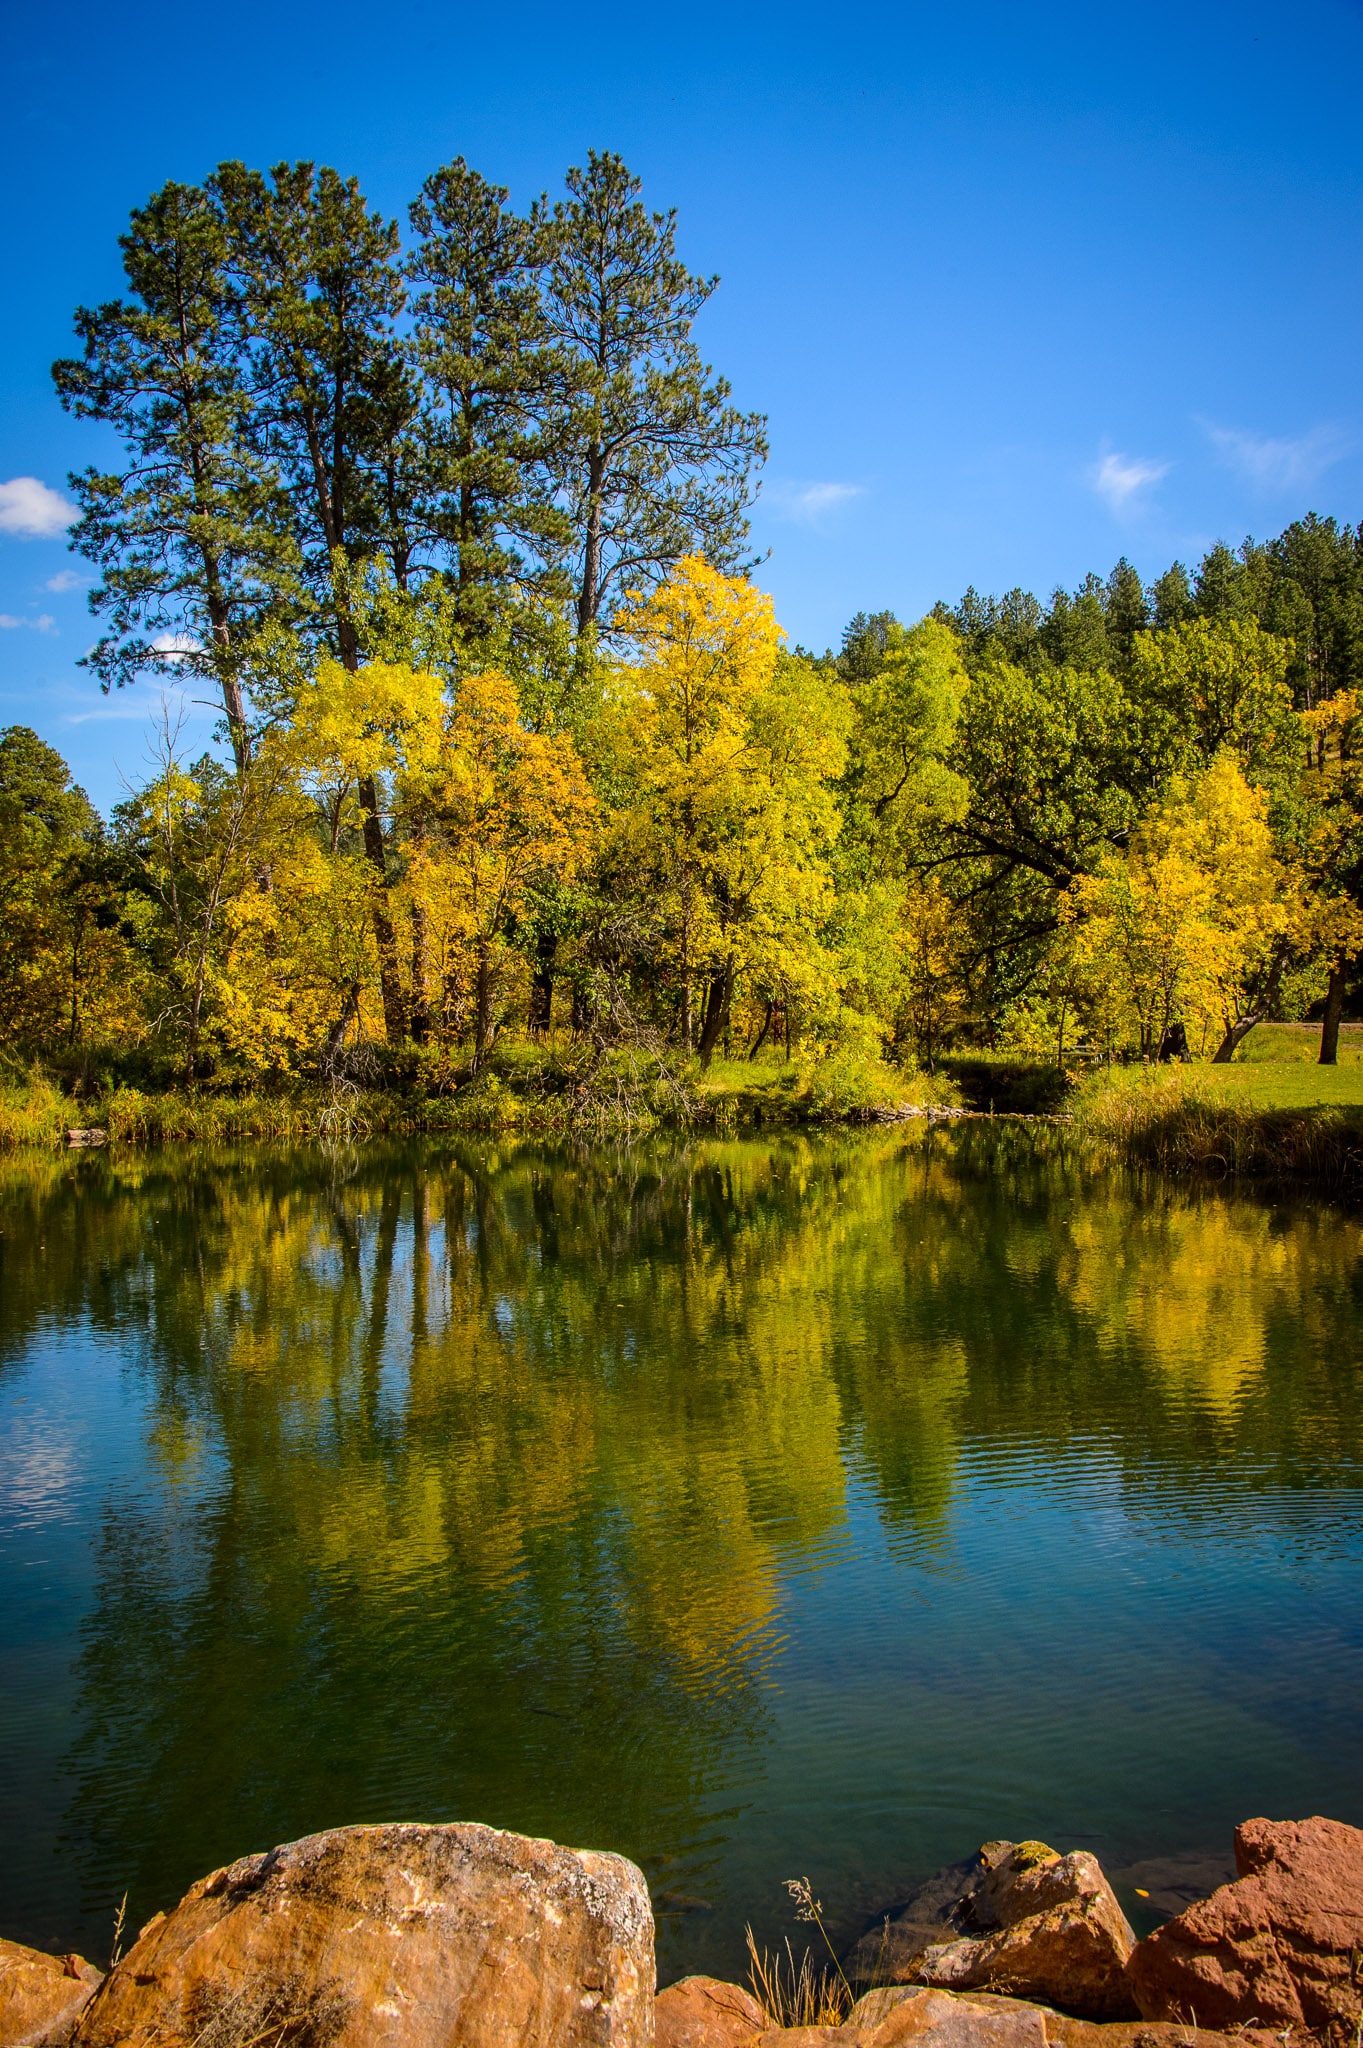 Fall leaves on the trees refelct in a lake in the Black Hills of South Dakota near Custer.